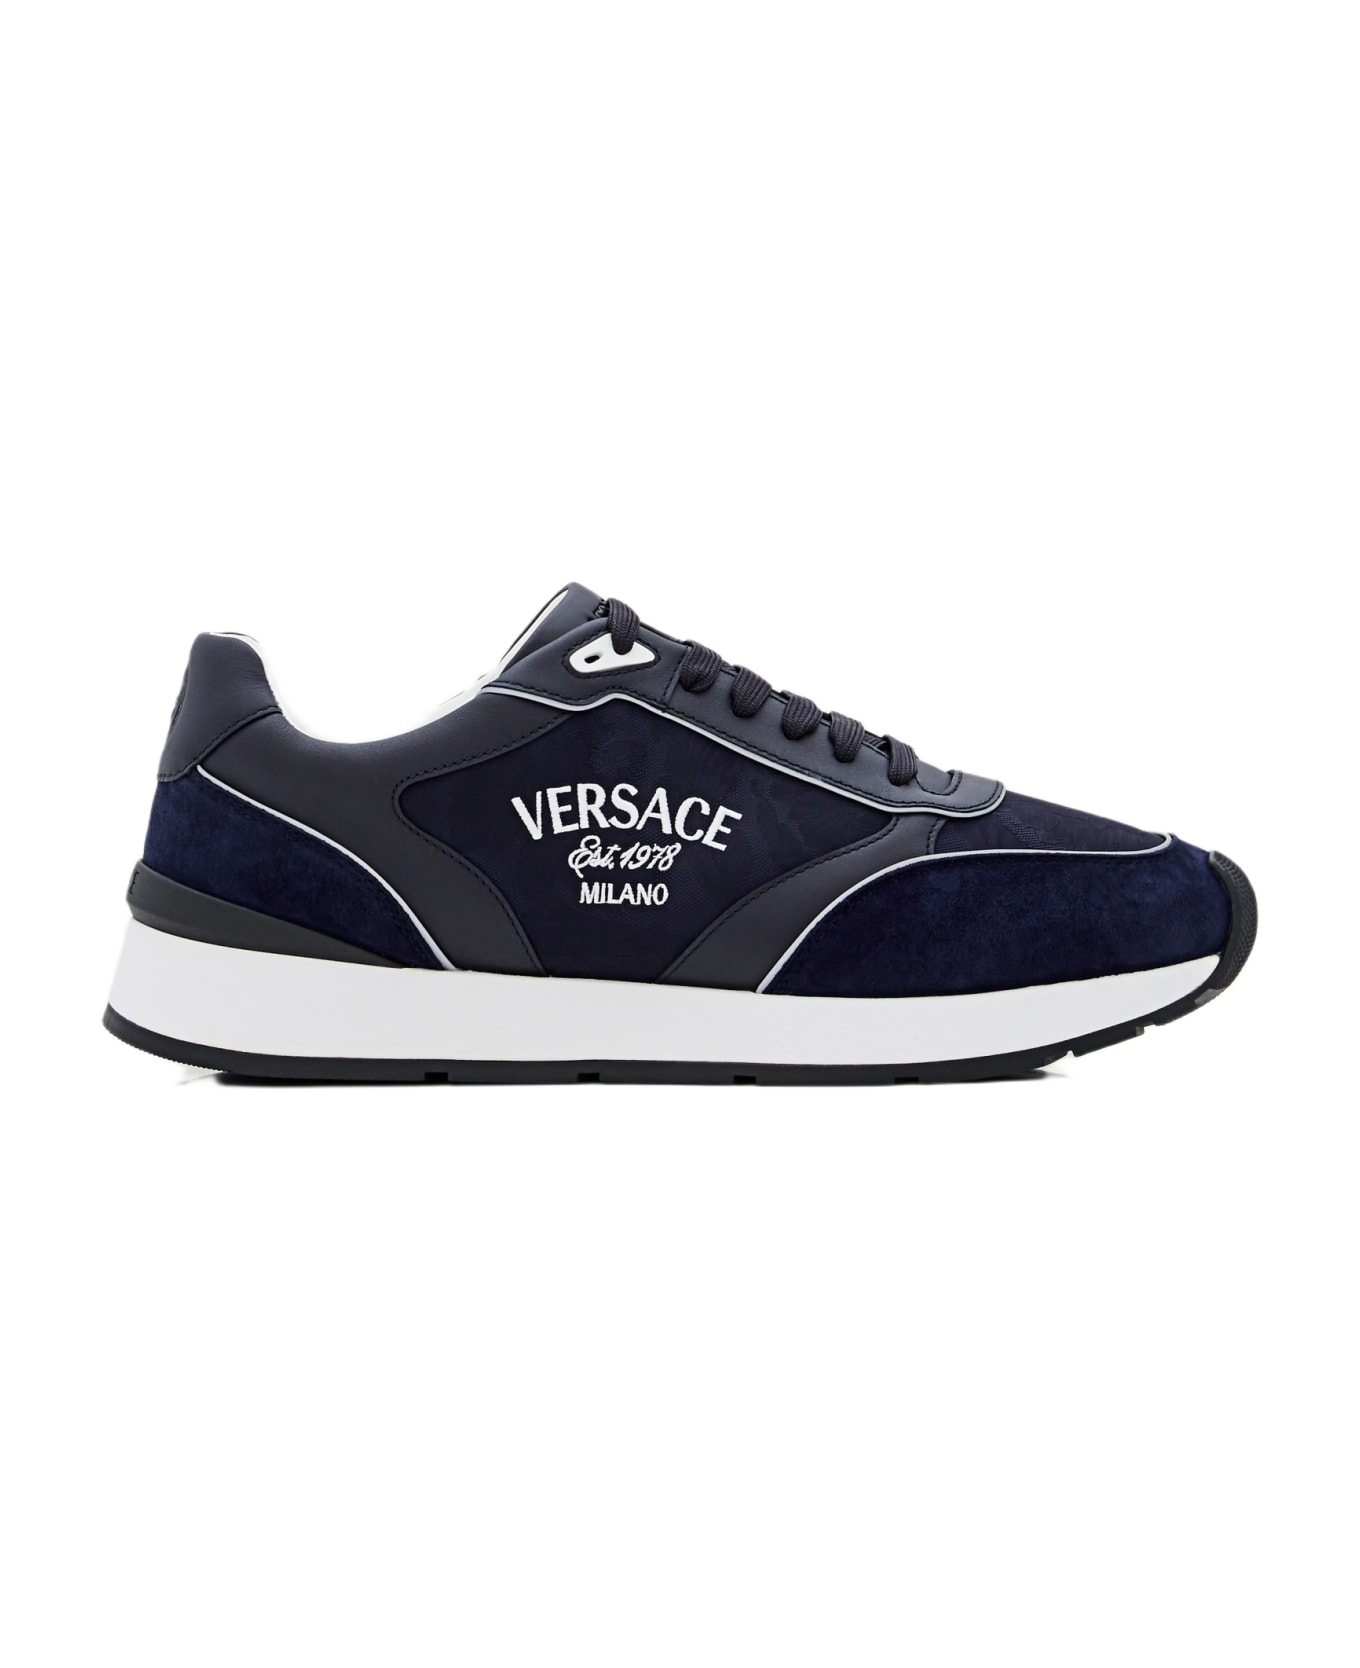 Versace Calf Leather Sneakers - Blue スニーカー